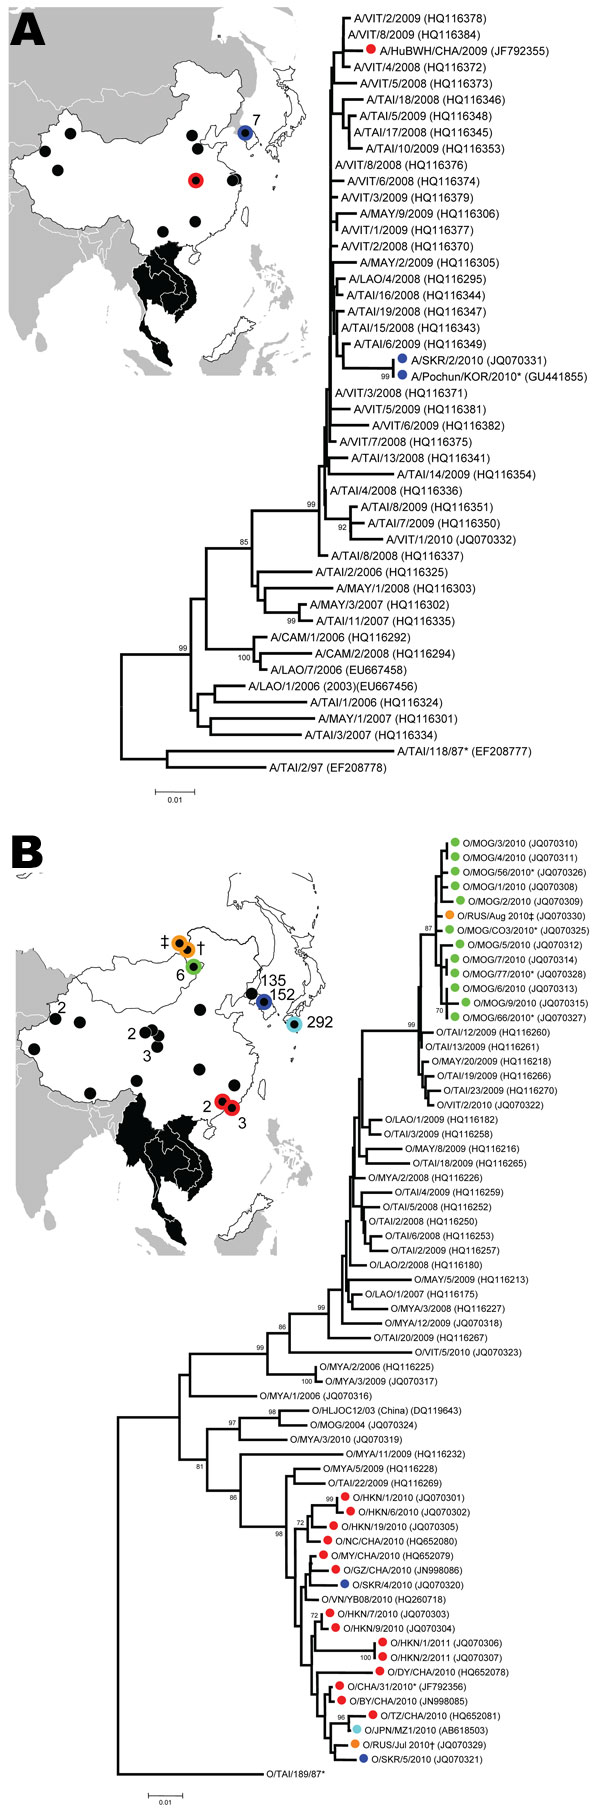 Unrooted neighbor-joining trees showing nucleotide sequence relationships between A) serotype A and B) serotype O foot-and-mouth disease (FMD) viruses from eastern Asia (red, China; dark blue, South Korea; orange, Russia; green, Mongolia; light blue, Japan) compared with closely related virus sequences from countries in mainland Southeast Asia to which FMD is endemic (black areas). Thirty-one viral protein 1 nucleotide sequences obtained during this study have been submitted to GenBank (accessio